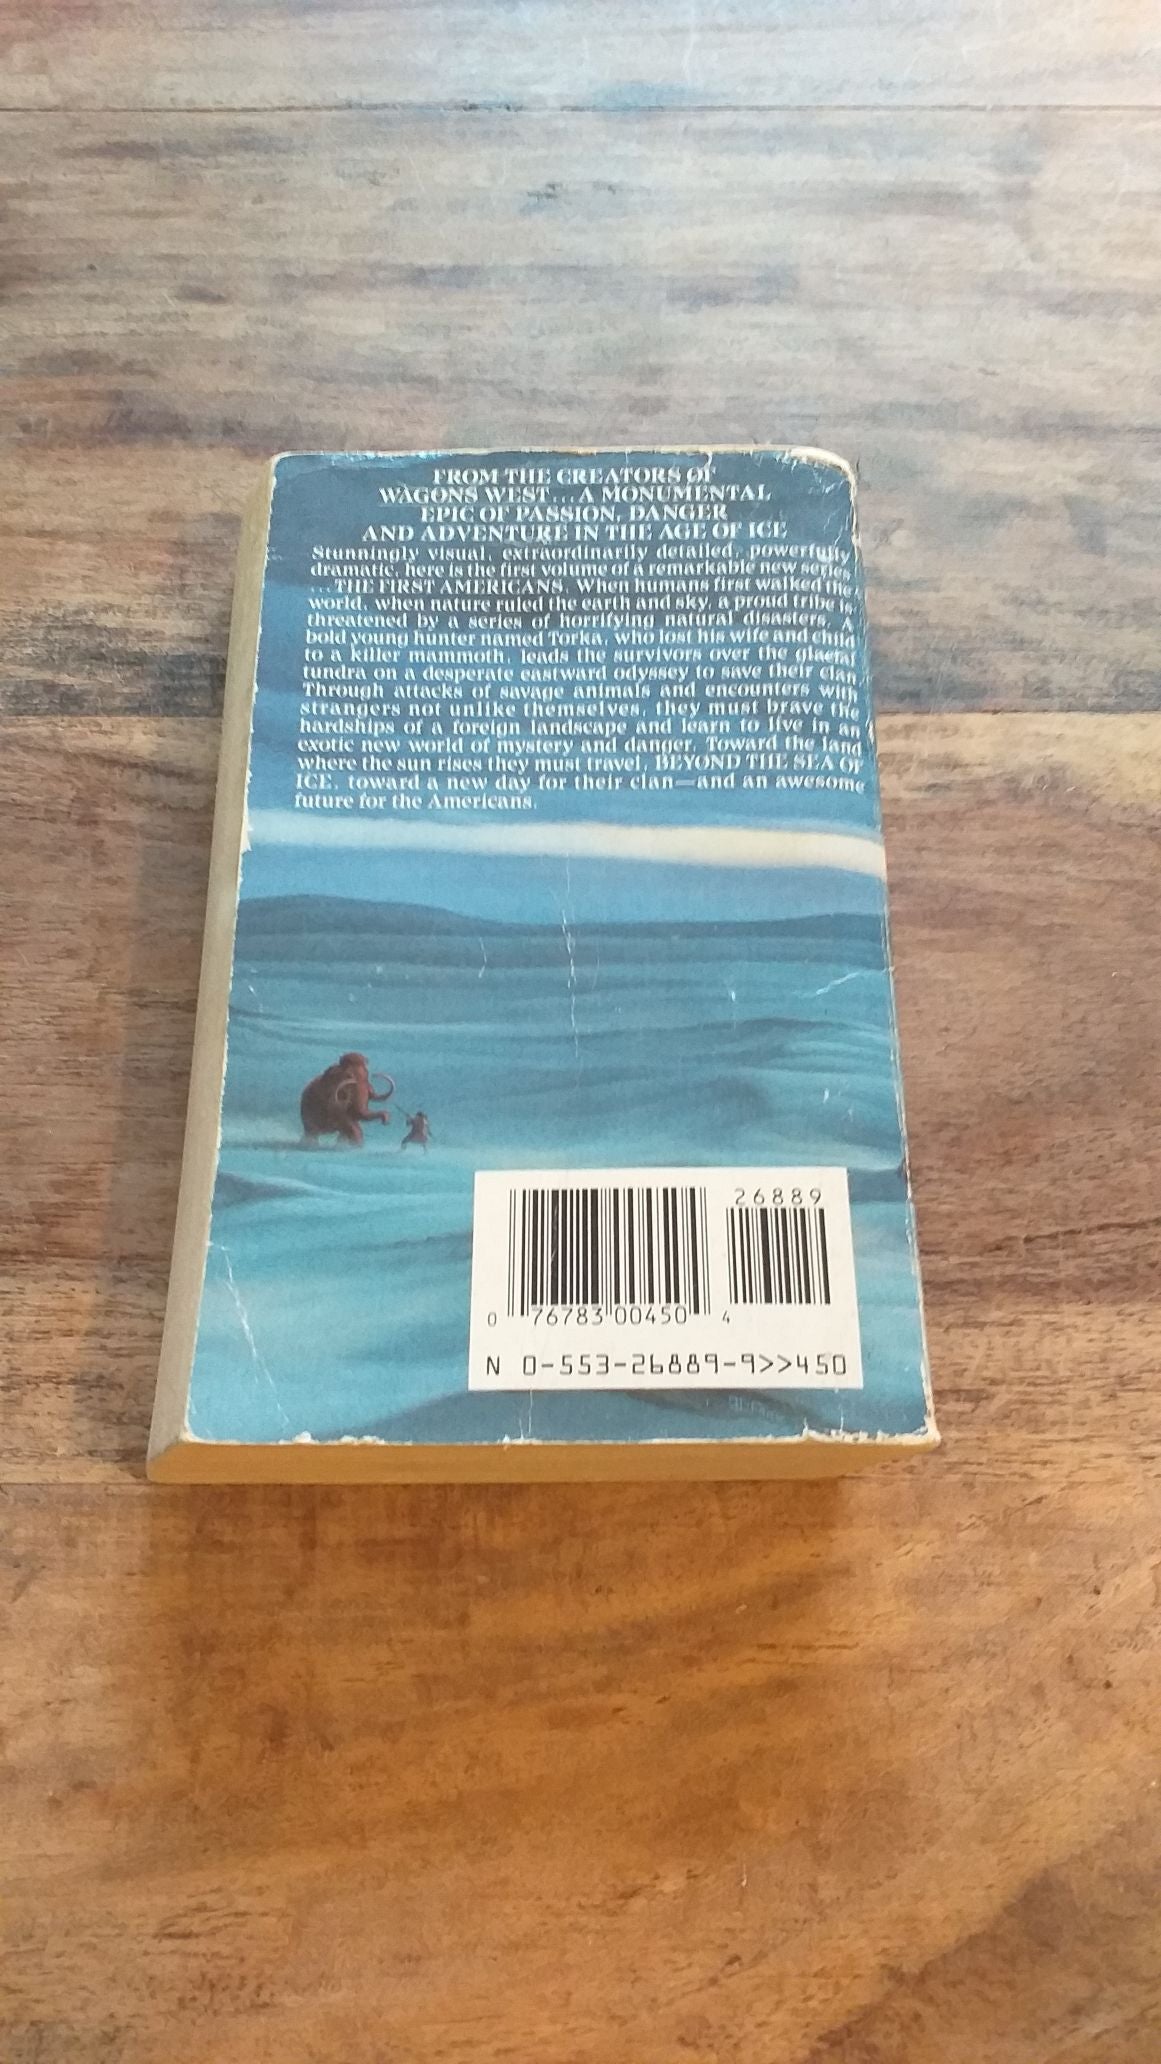 Beyond the Sea of Ice William Sarabande First Americans Series Book #1 1987